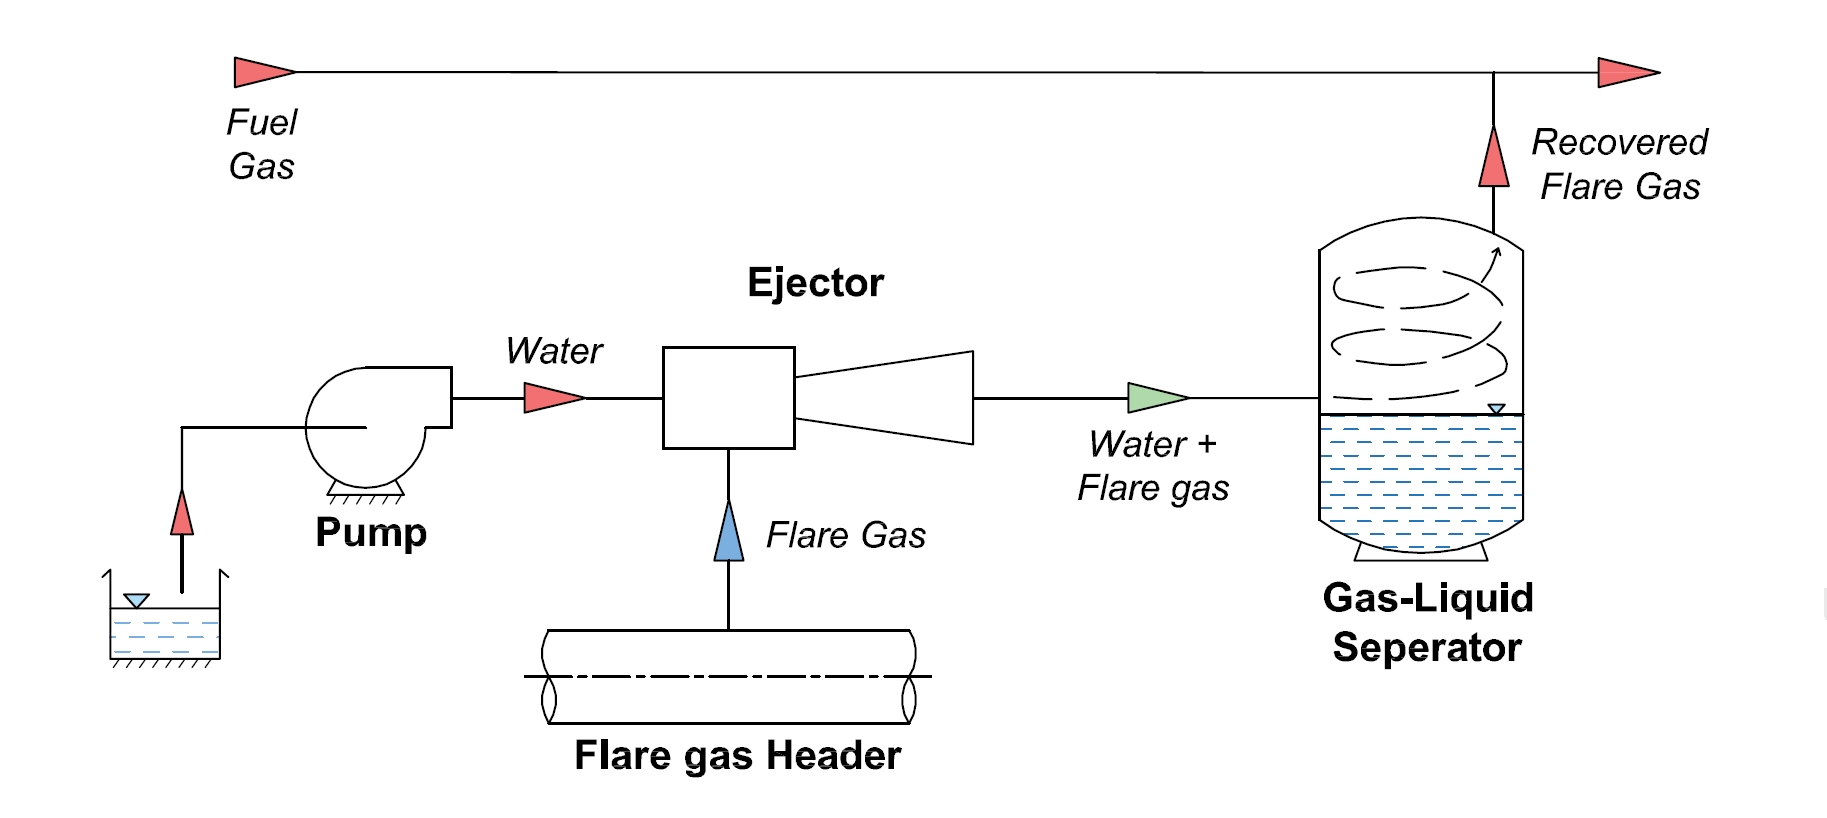 Liquid jet gas Compressors for Flare Recovery